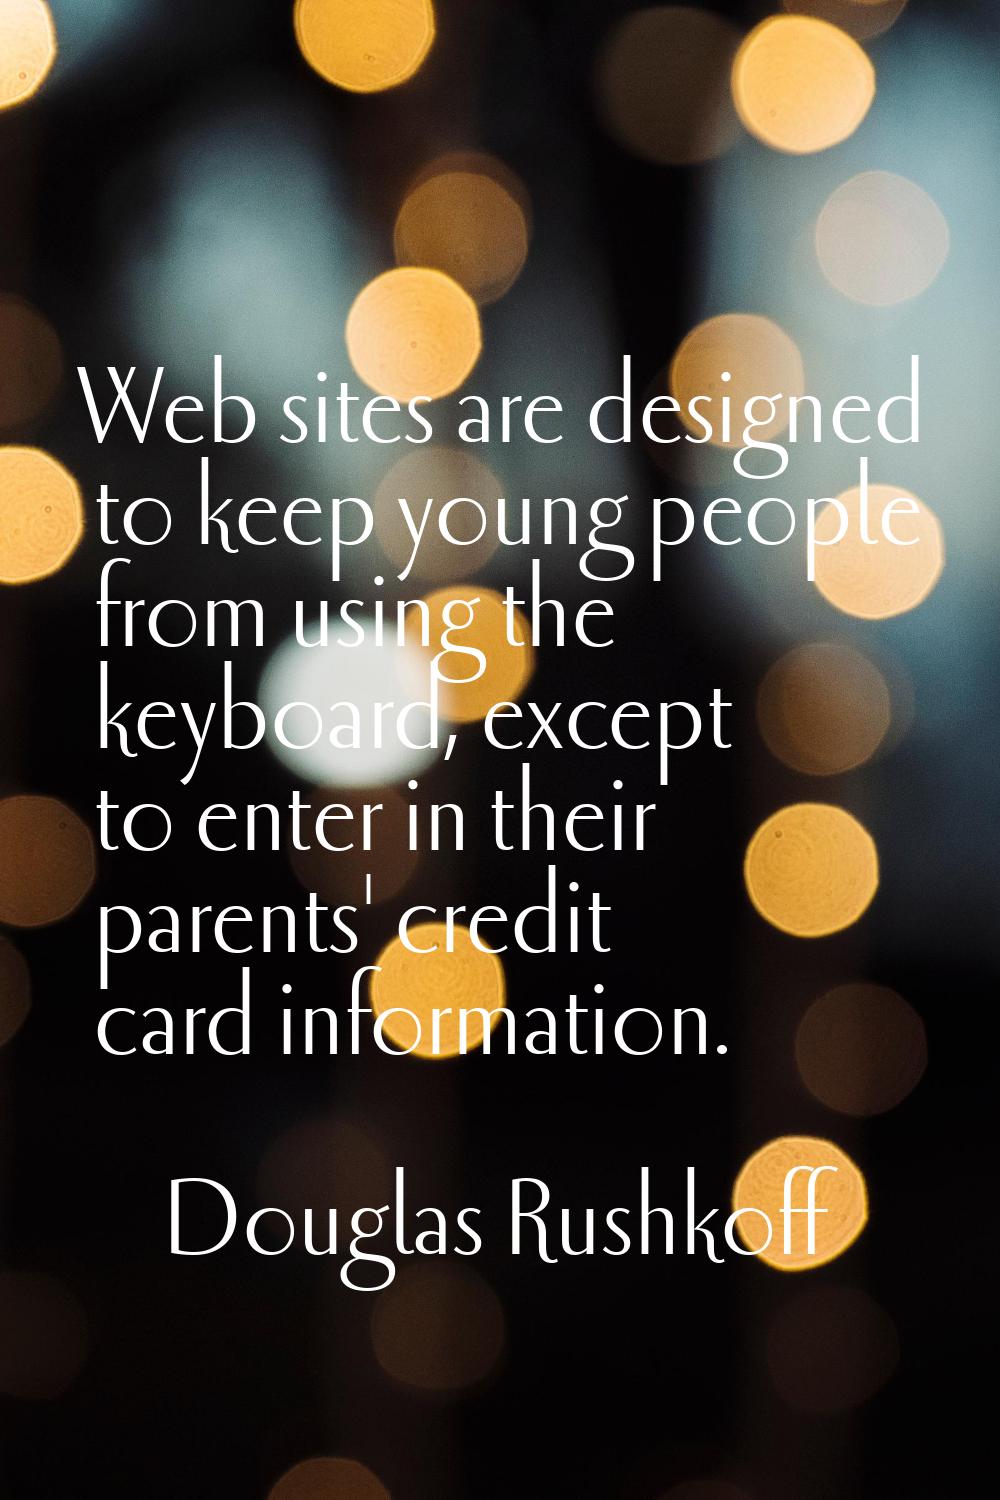 Web sites are designed to keep young people from using the keyboard, except to enter in their paren